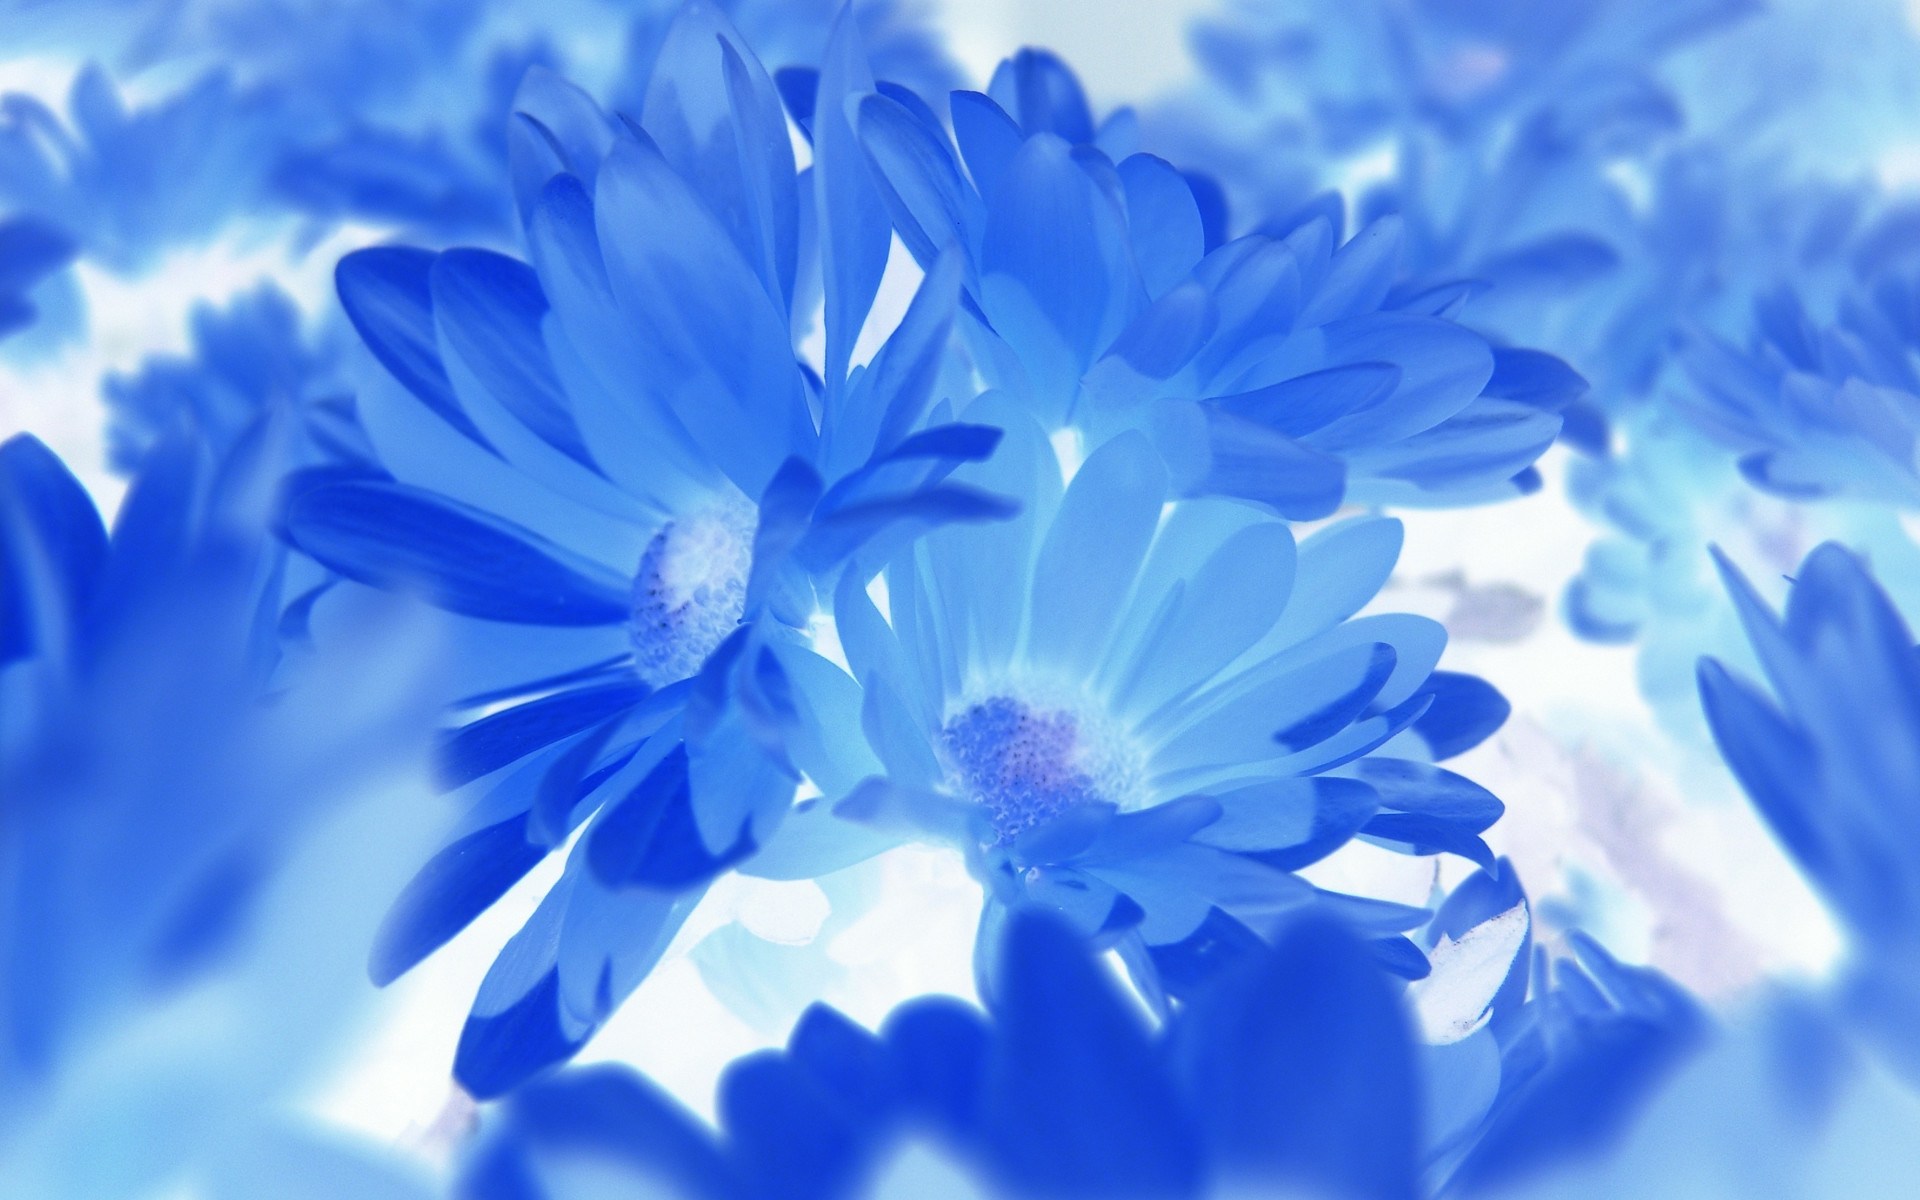 Beautiful Wallpaper Hd Blue Search Free Blur Wallpapers On Zedge And